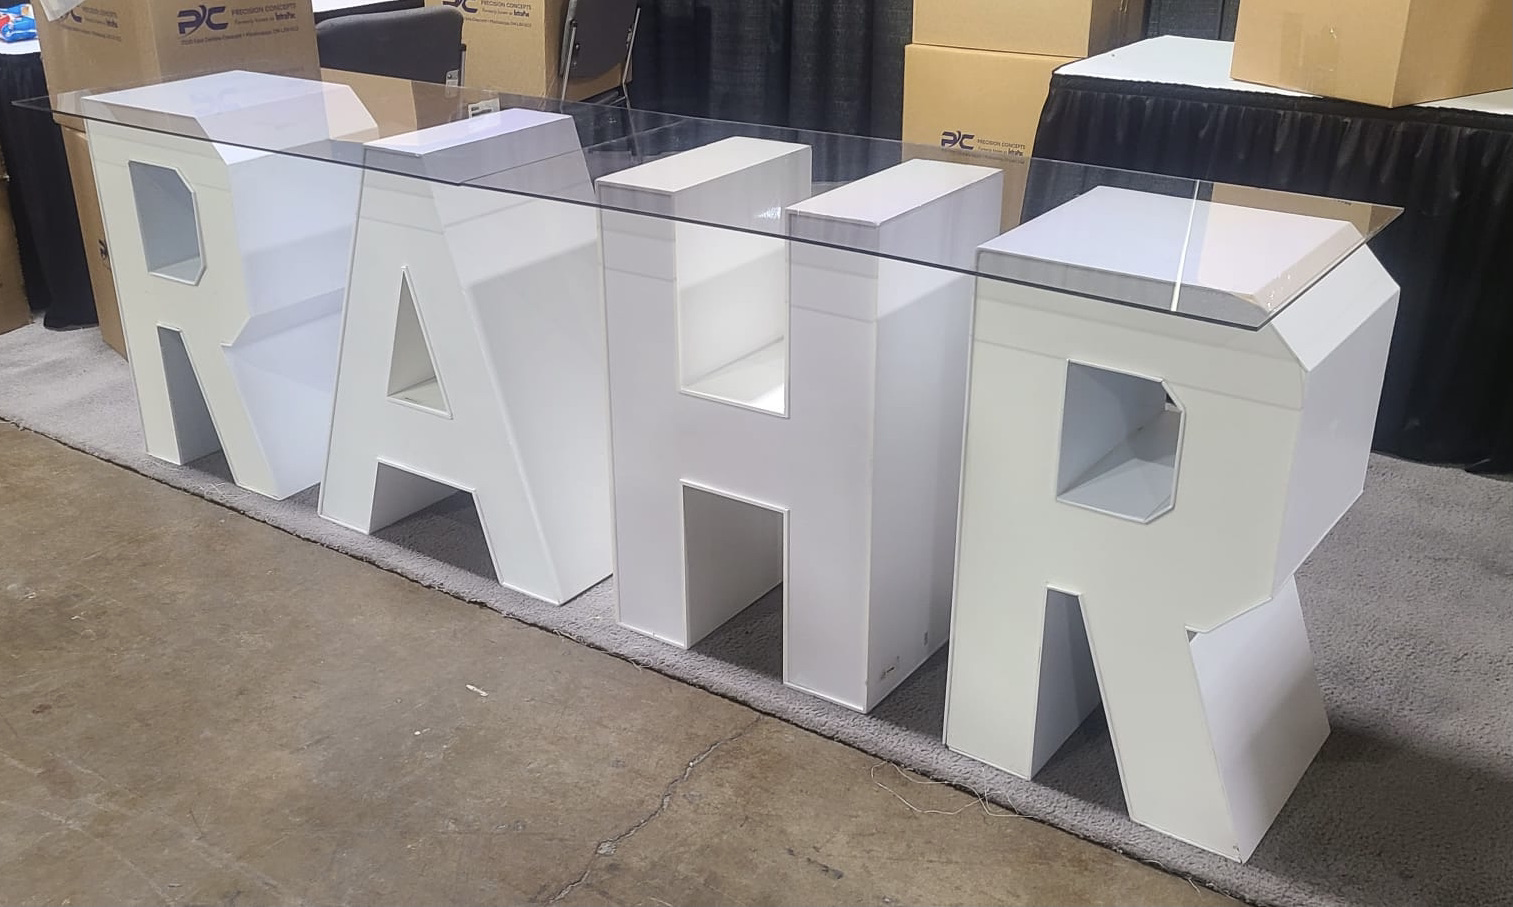 Bolton Marquee Block Letters Table